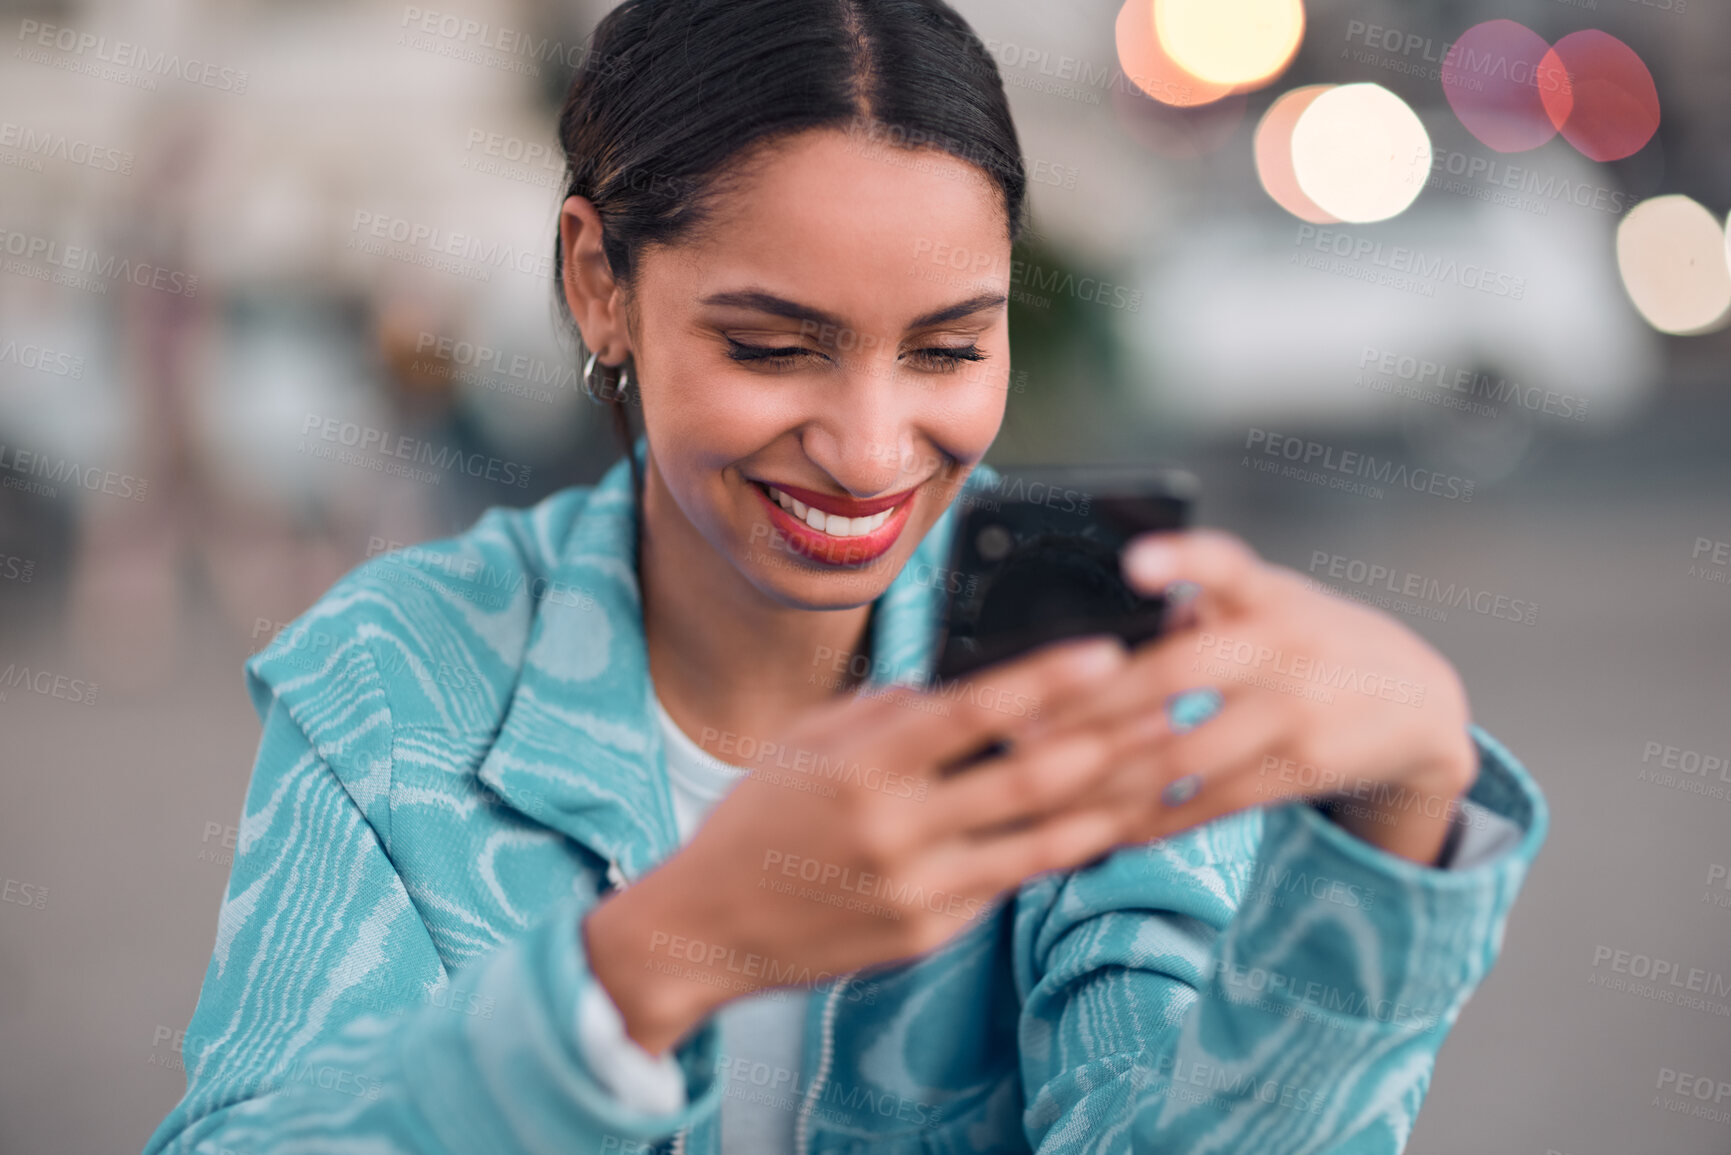 Buy stock photo Trendy, happy and modern woman texting on a phone, browsing social media or surfing the internet. Single female looking confident and relaxed, smiling while reading a message on an online dating app